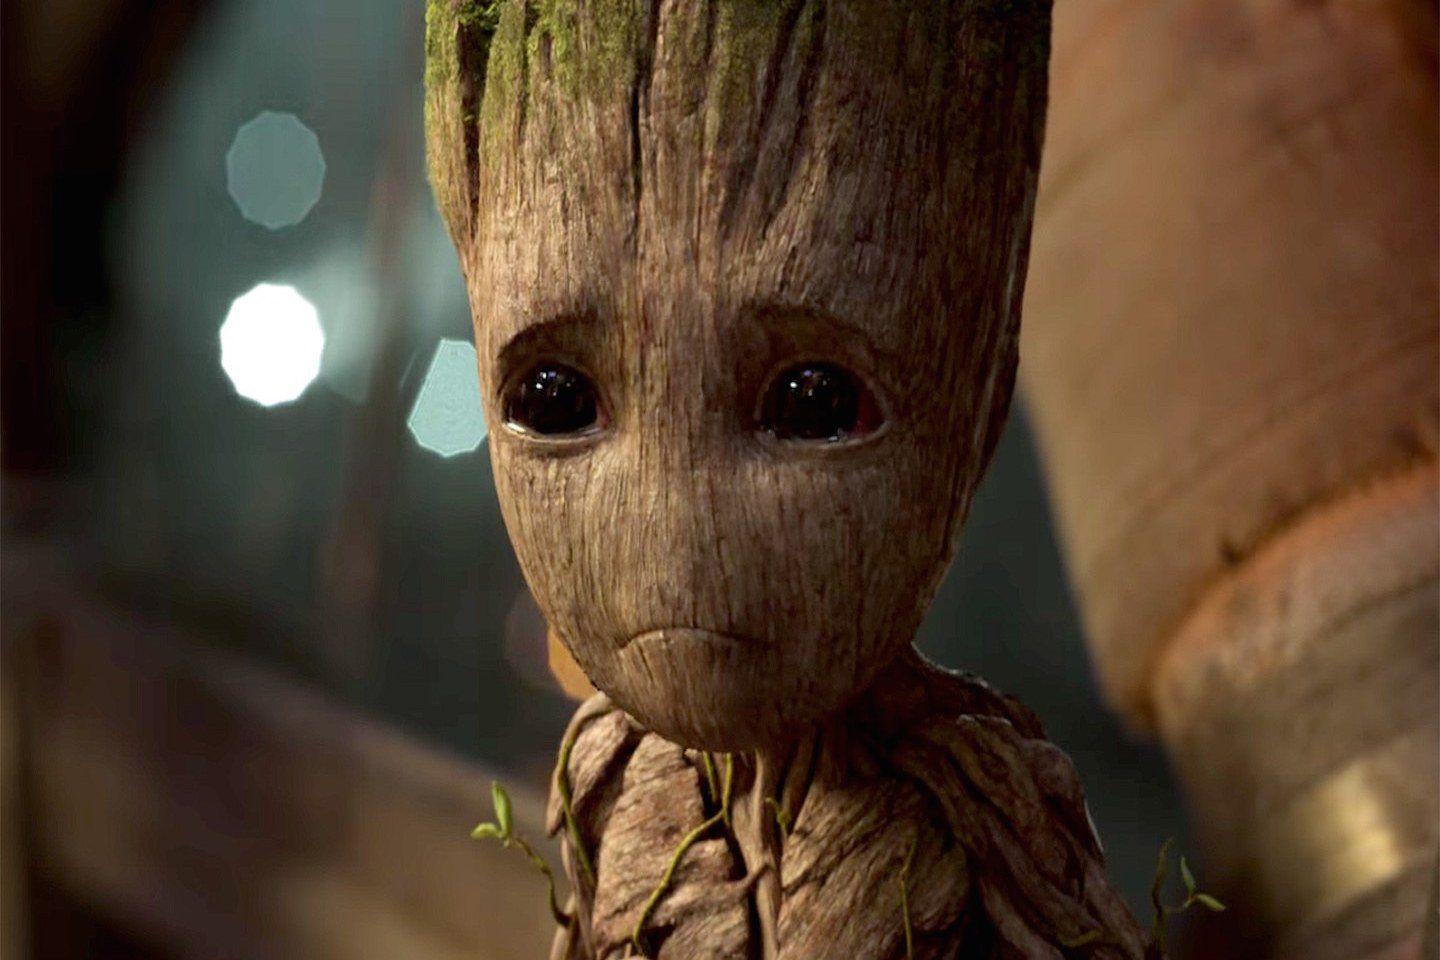 Groot Actually Died in 'Guardians Of The Galaxy', Sorry About That